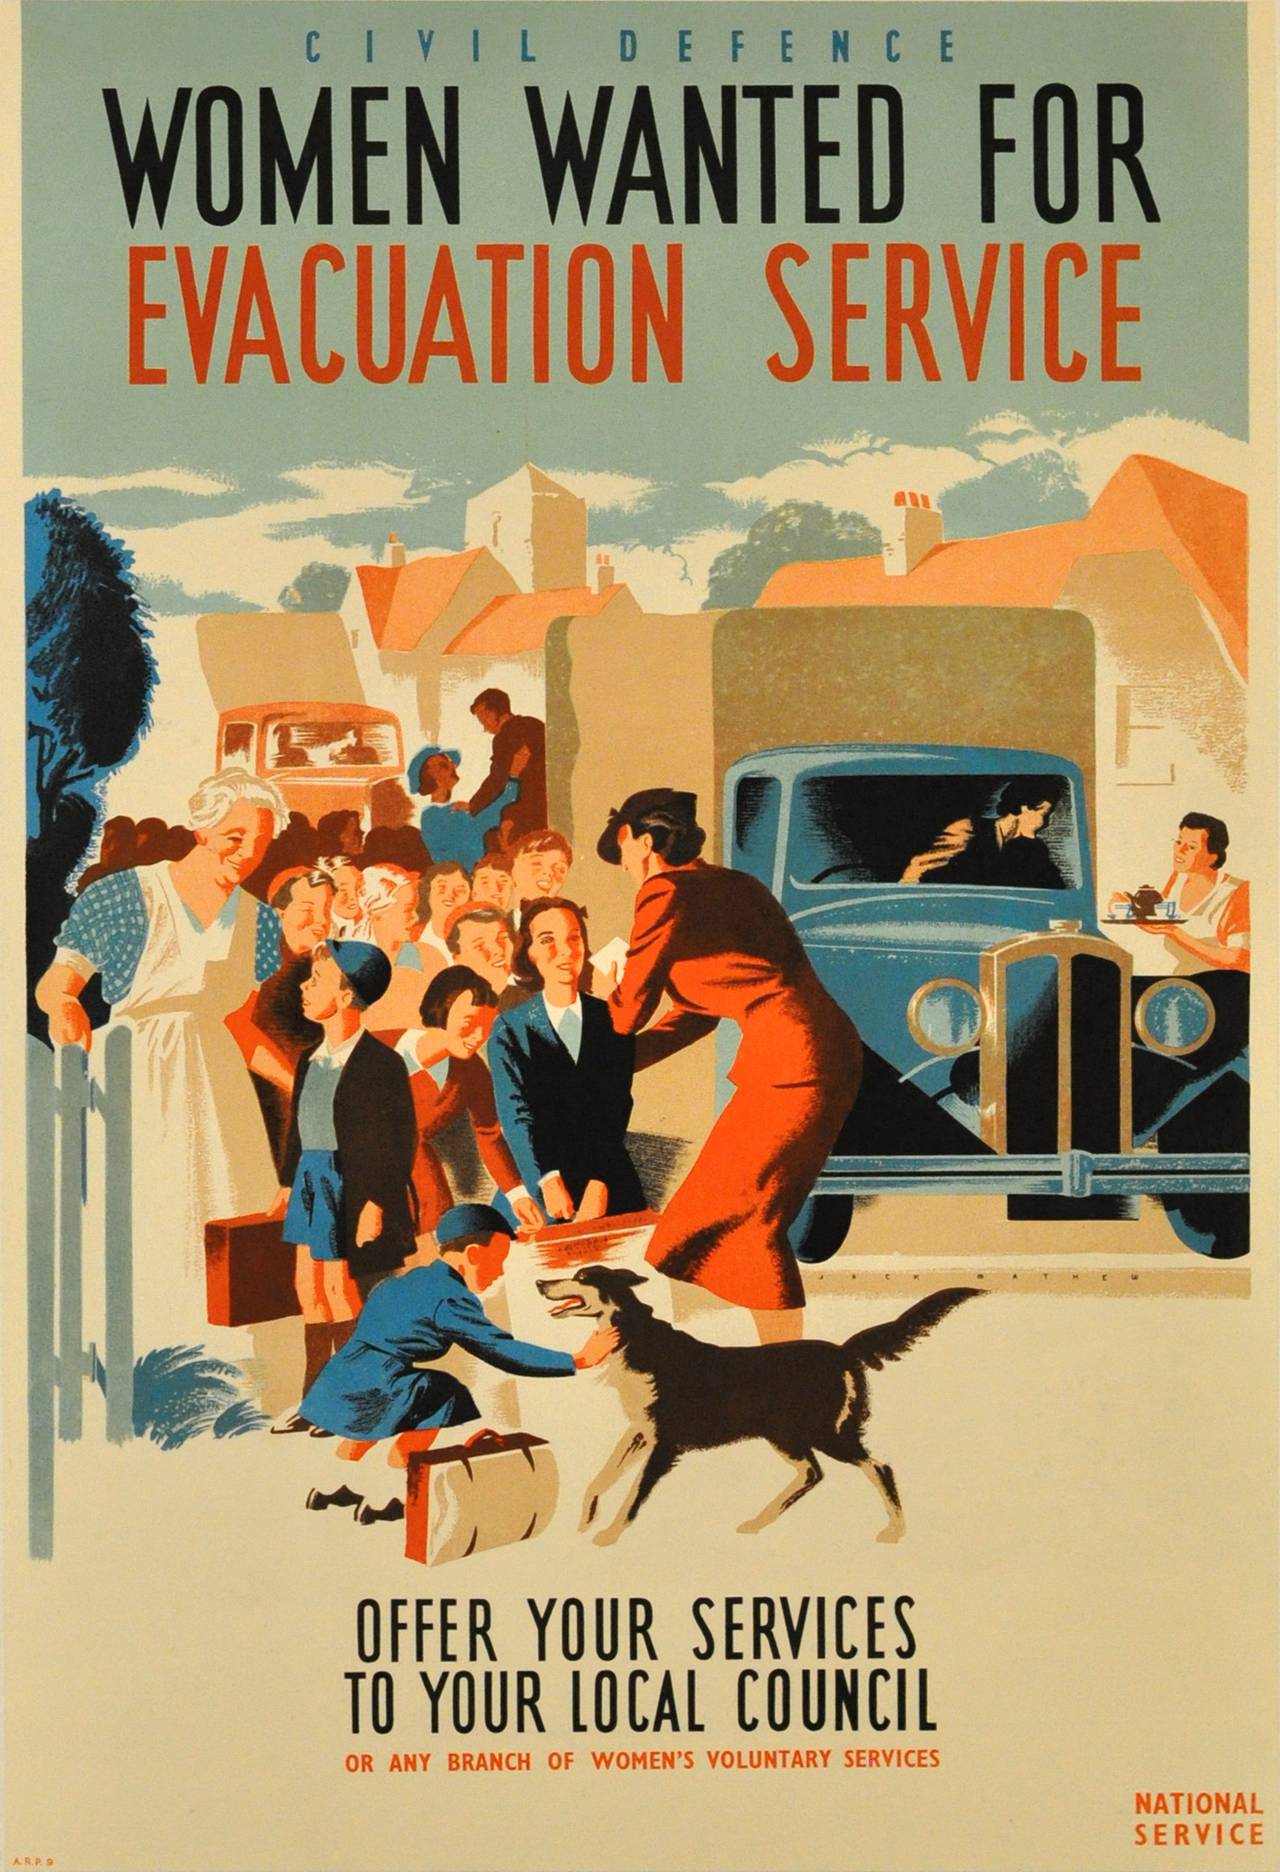 Jack Mathew Print - Original World War Two Poster: Civil Defence Women Wanted For Evacuation Service